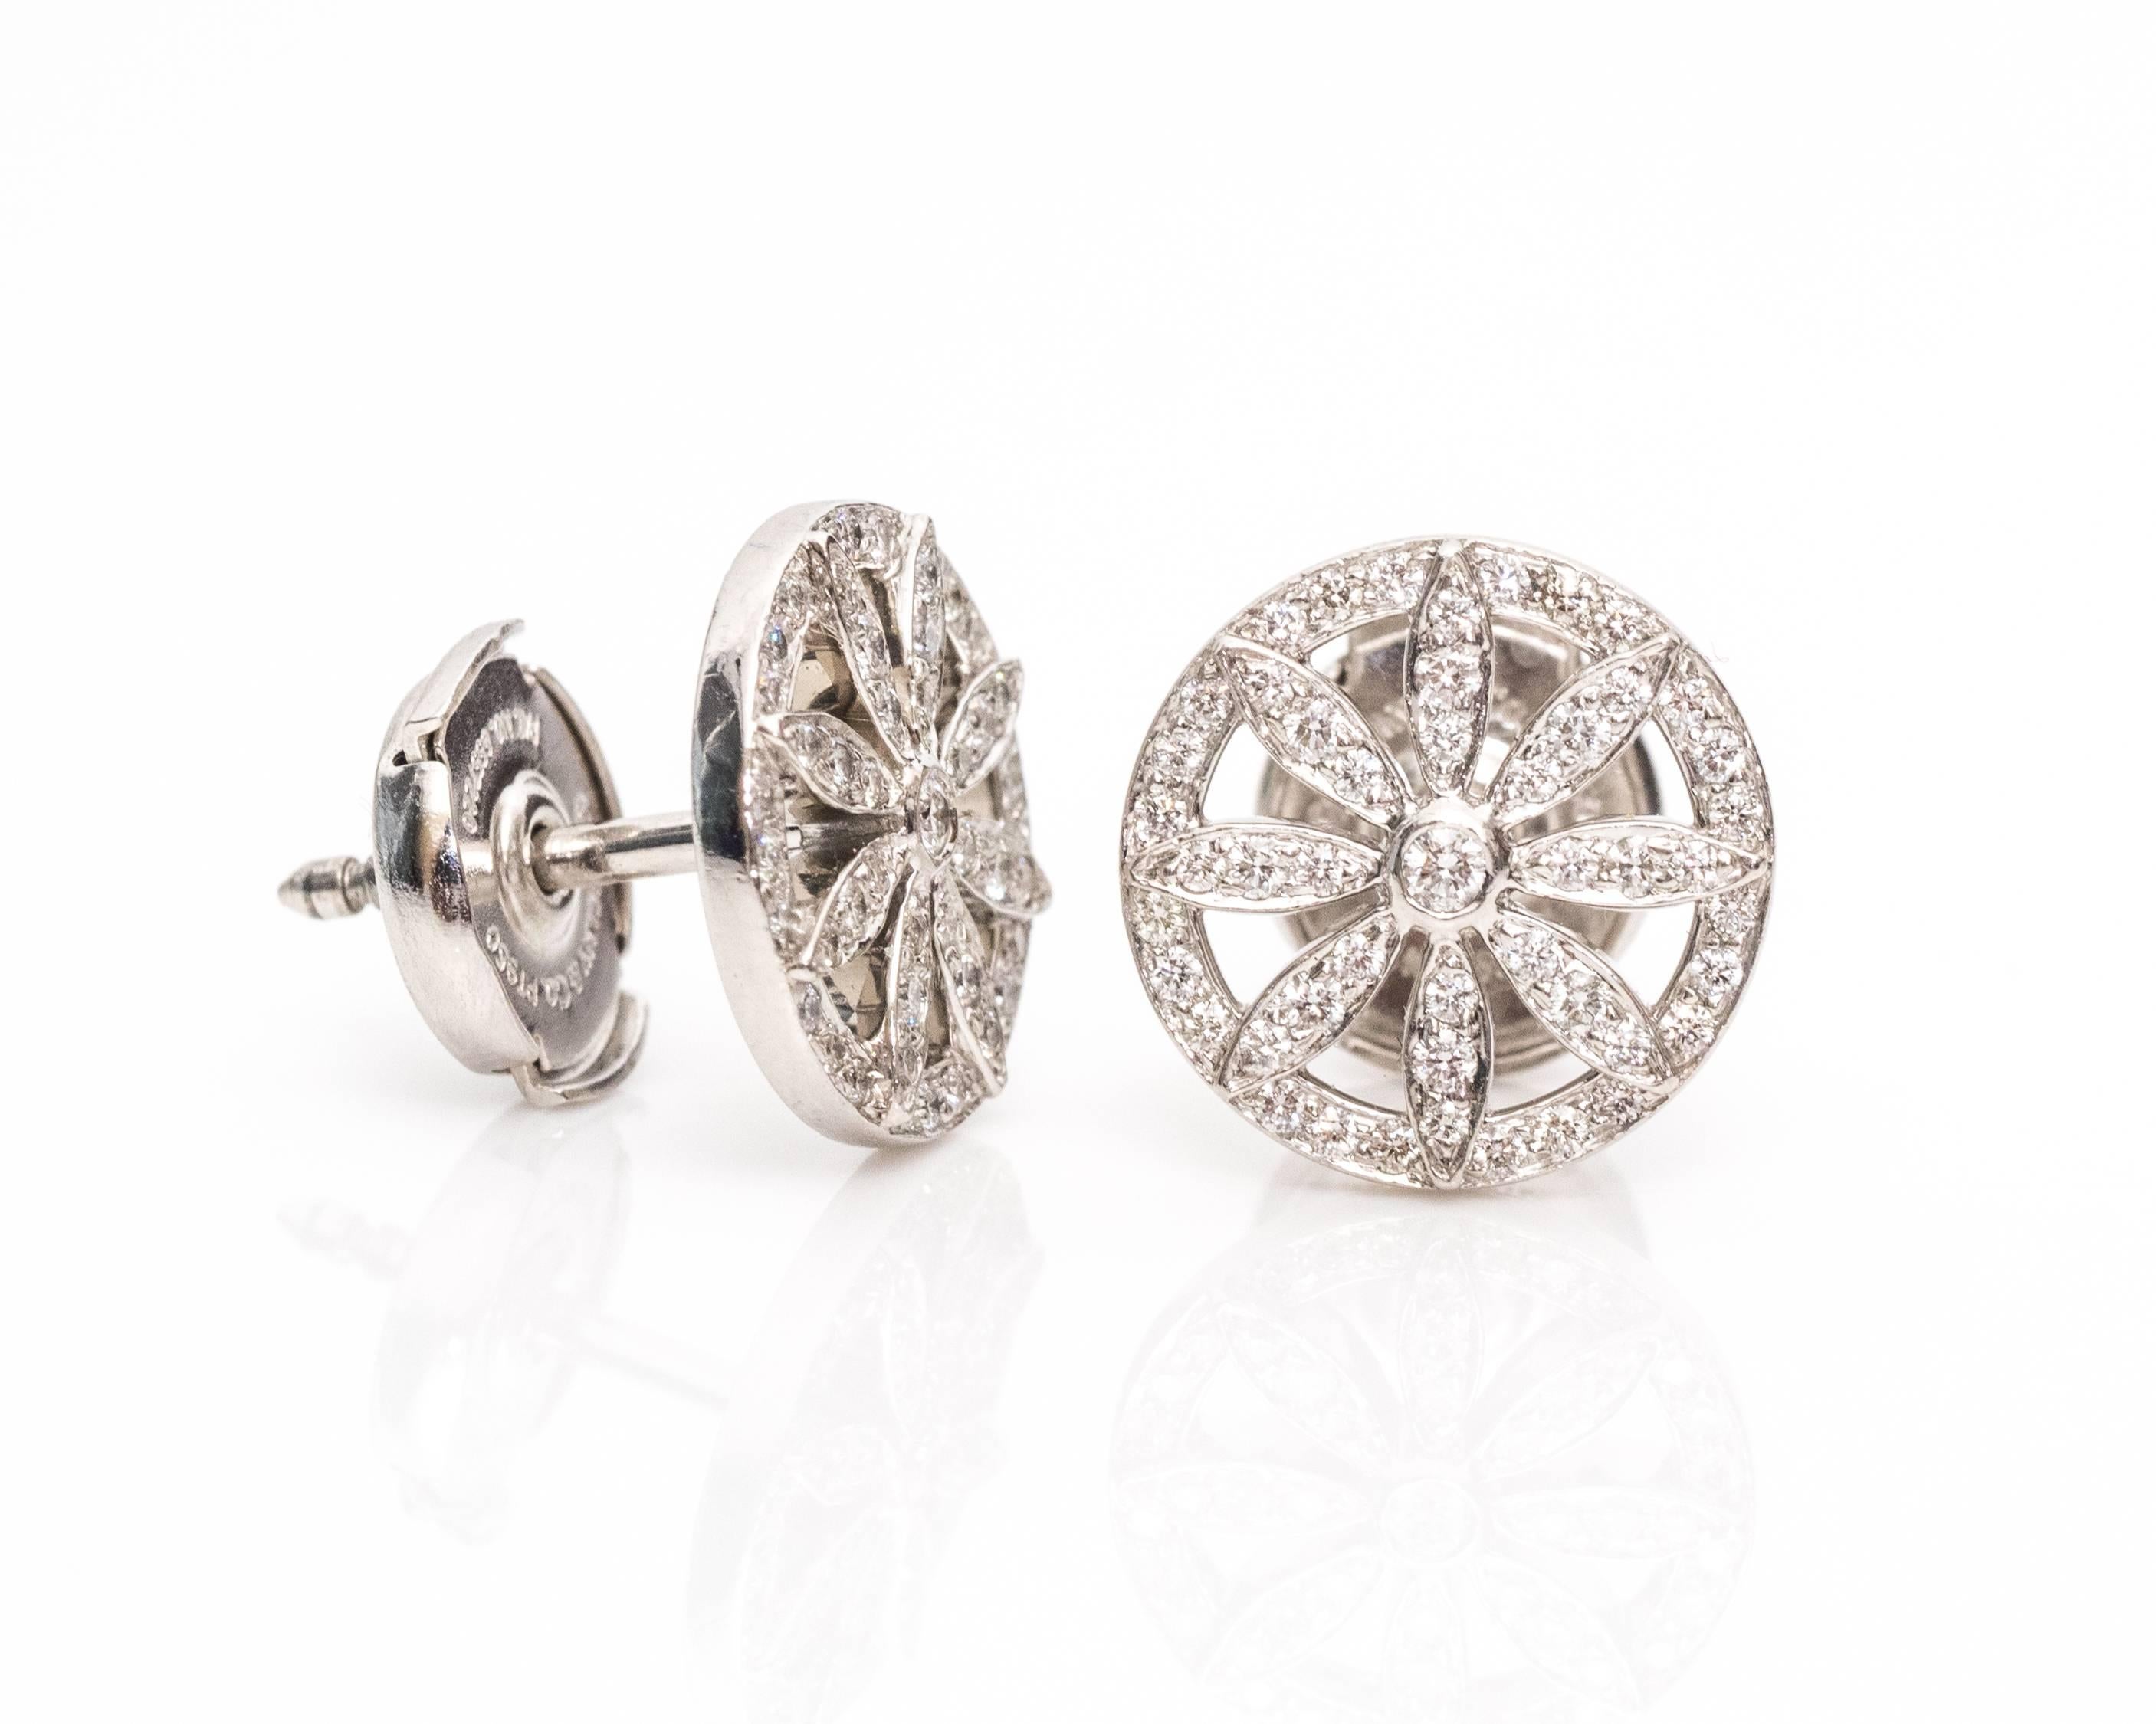 Tiffany & Co. .40 Carat Diamond and Platinum Stud Earrings. The center of each piece has a star/floral shape embedded with round brilliant diamonds. The diamonds total to .40 carats with F color and VS clarity. The studs are made of platinum